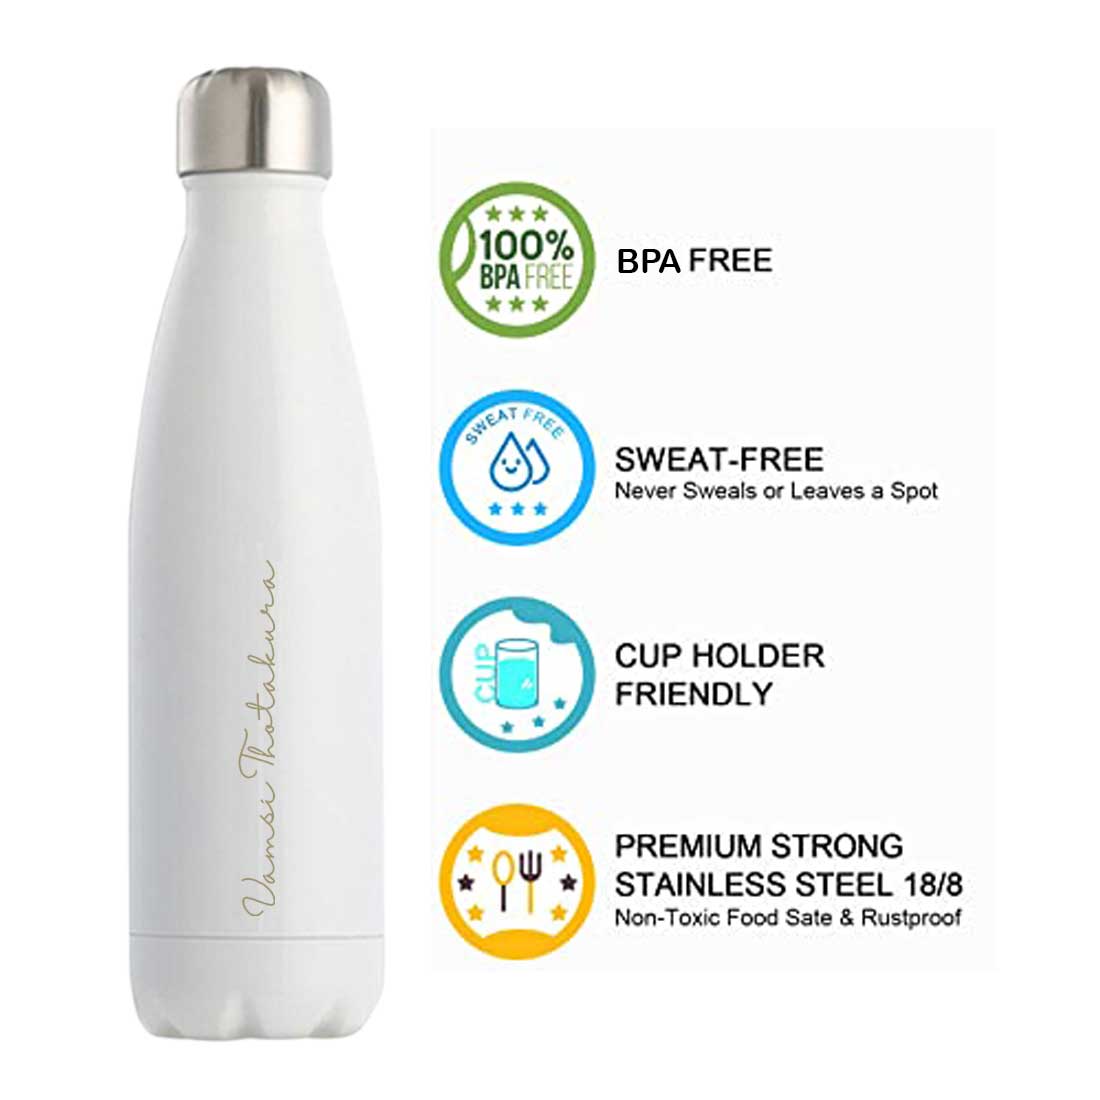 Customized Water Bottle Flask Stainless Steel for Drinking Hot & Cold 500 ml